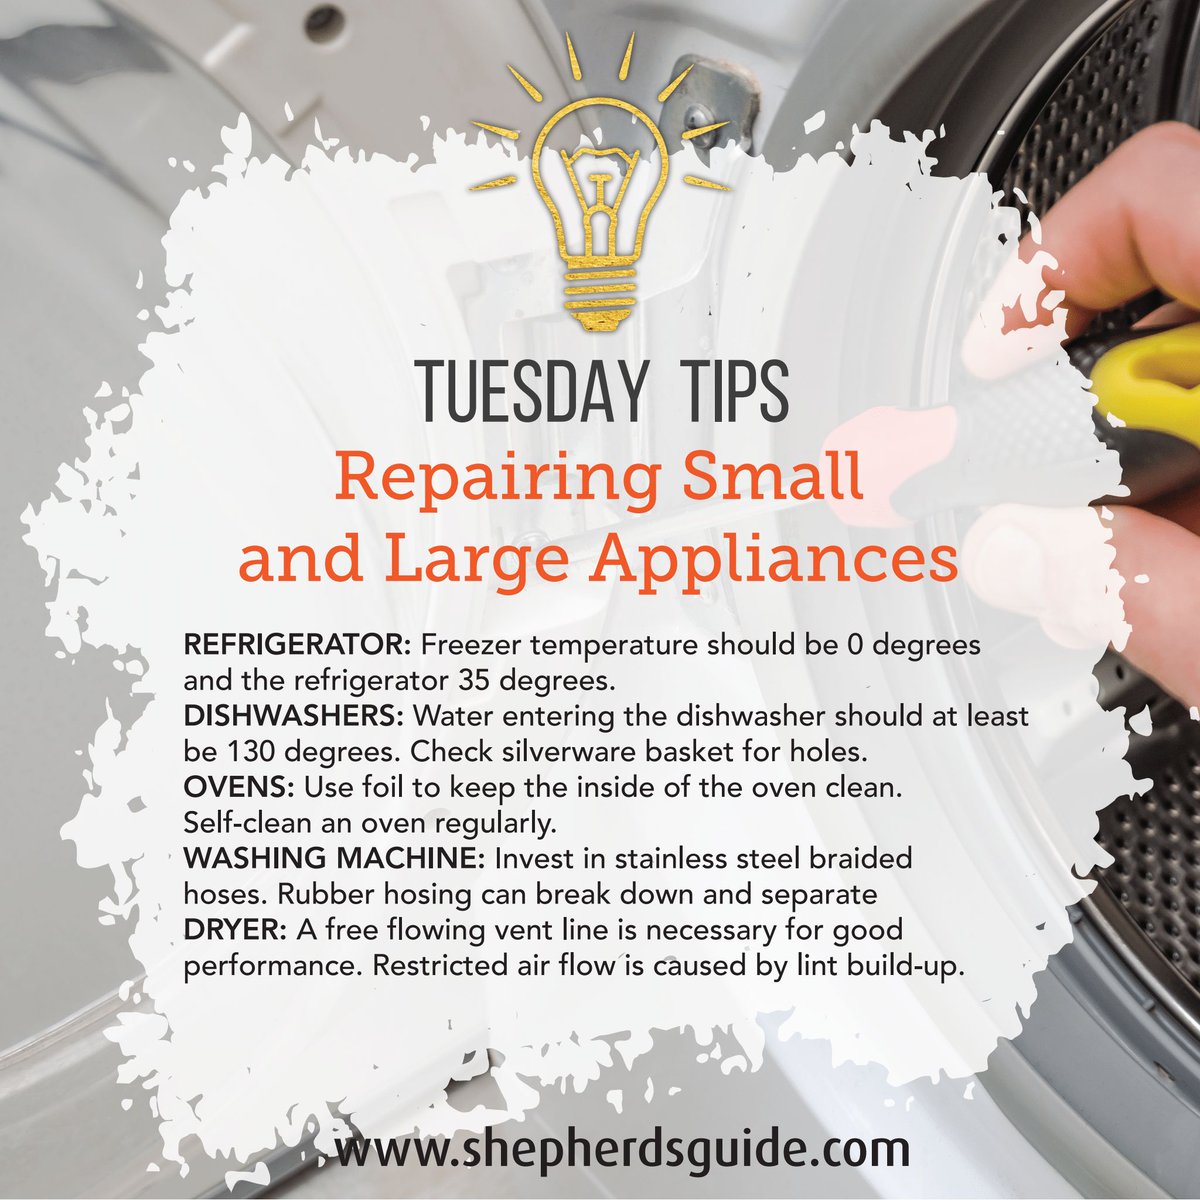 Tuesday Tips–
Repairing Small and Large Appliances
#TuesdayTips #ShepherdsGuide
Read More: tinyurl.com/ykryv733